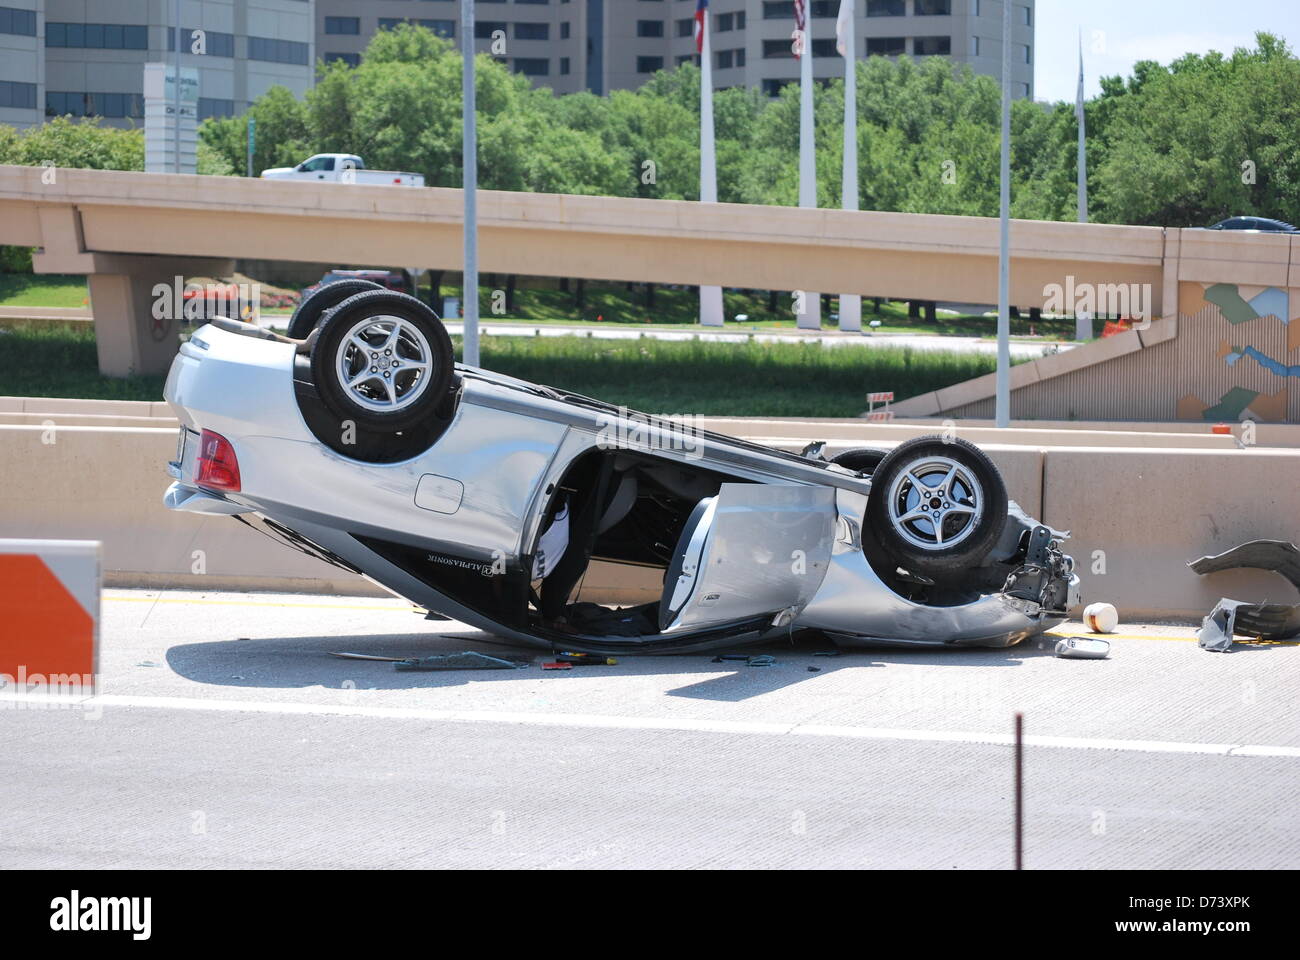 Dallas, TX, USA. 28 April 2013.  An injury accident on the West Bound Service Road  of the LBJ  Freeway at Blossomheath Ln. Credit: dallaspaparazzo/Alamy Live News Stock Photo